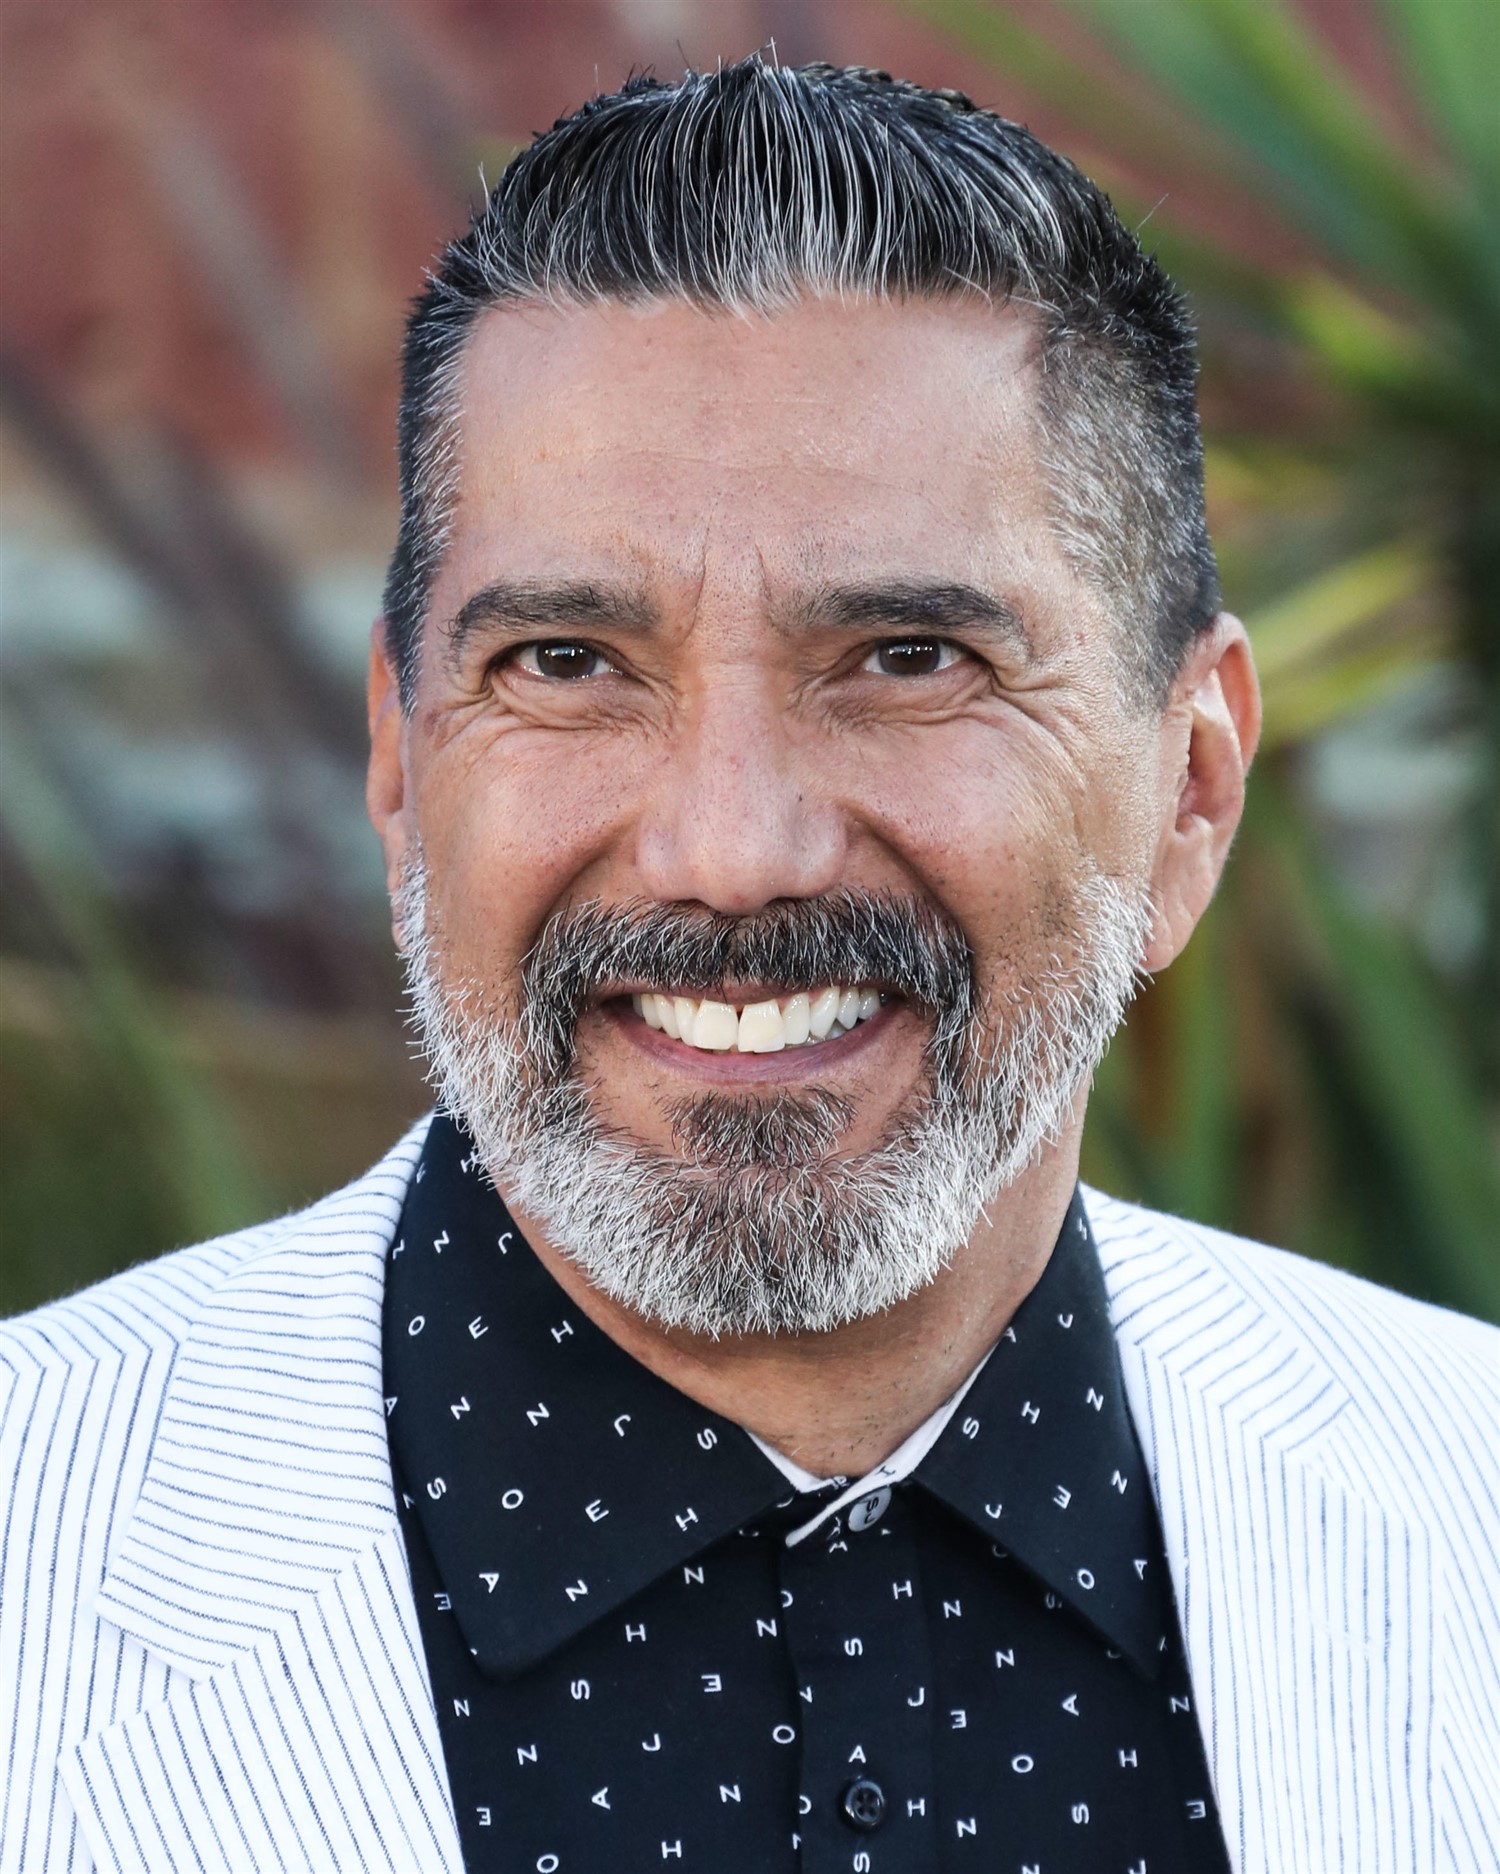 Steven Michael Quezada 7:20 Show Funny Stop Comedy Club on Sep 23, 19:20@Funny Stop Comedy Club - Buy tickets and Get information on Funny Stop funnystop.online